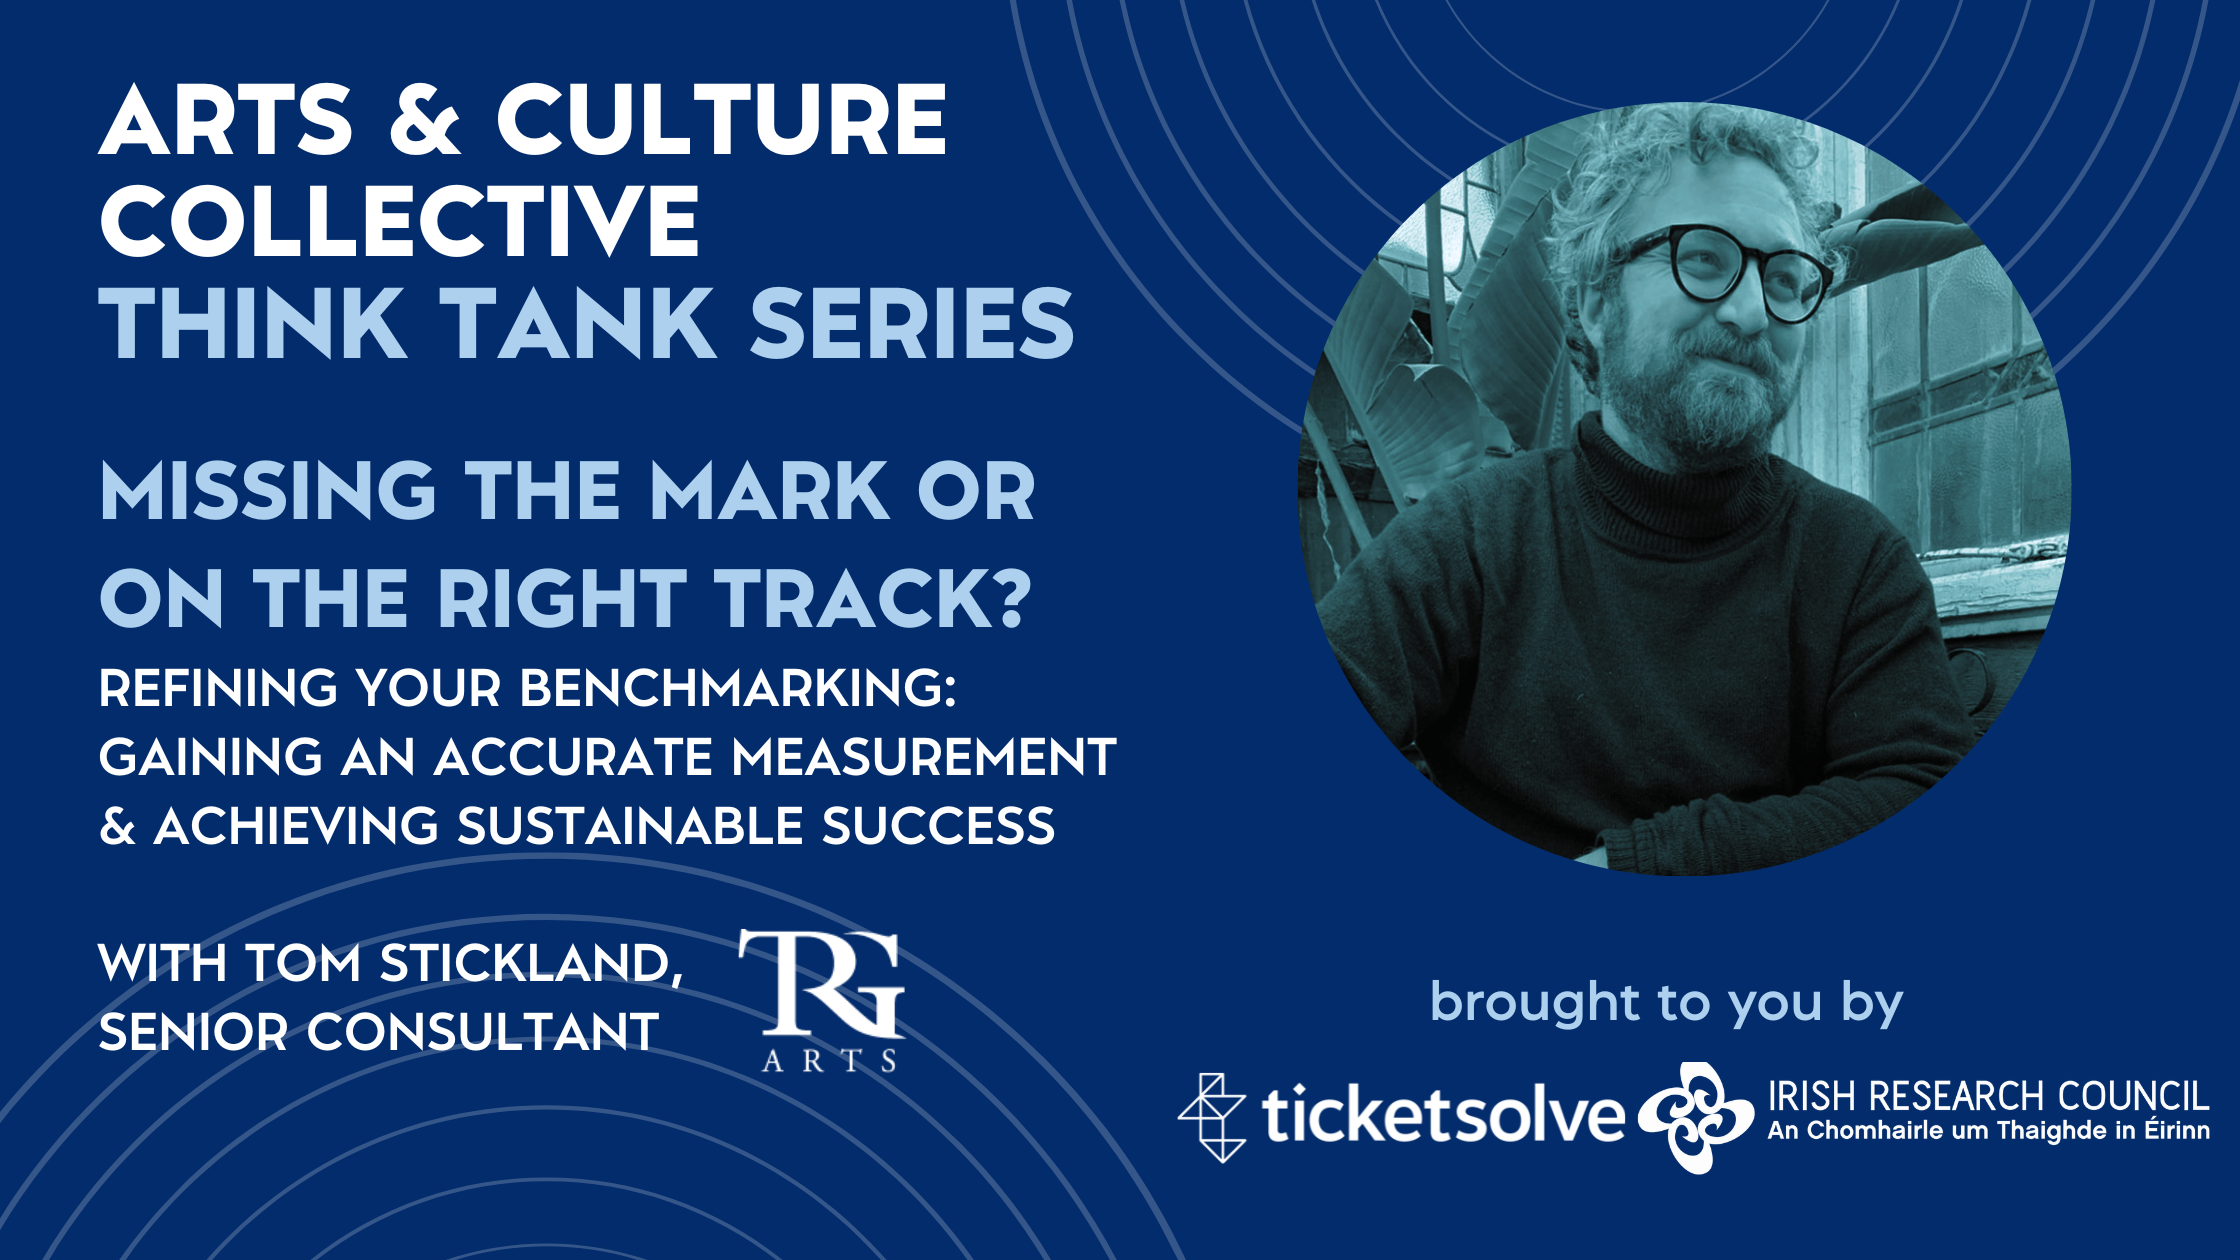 The Arts & Culture Collective Think Tank Series: Missing the Mark or On the Right Track? 